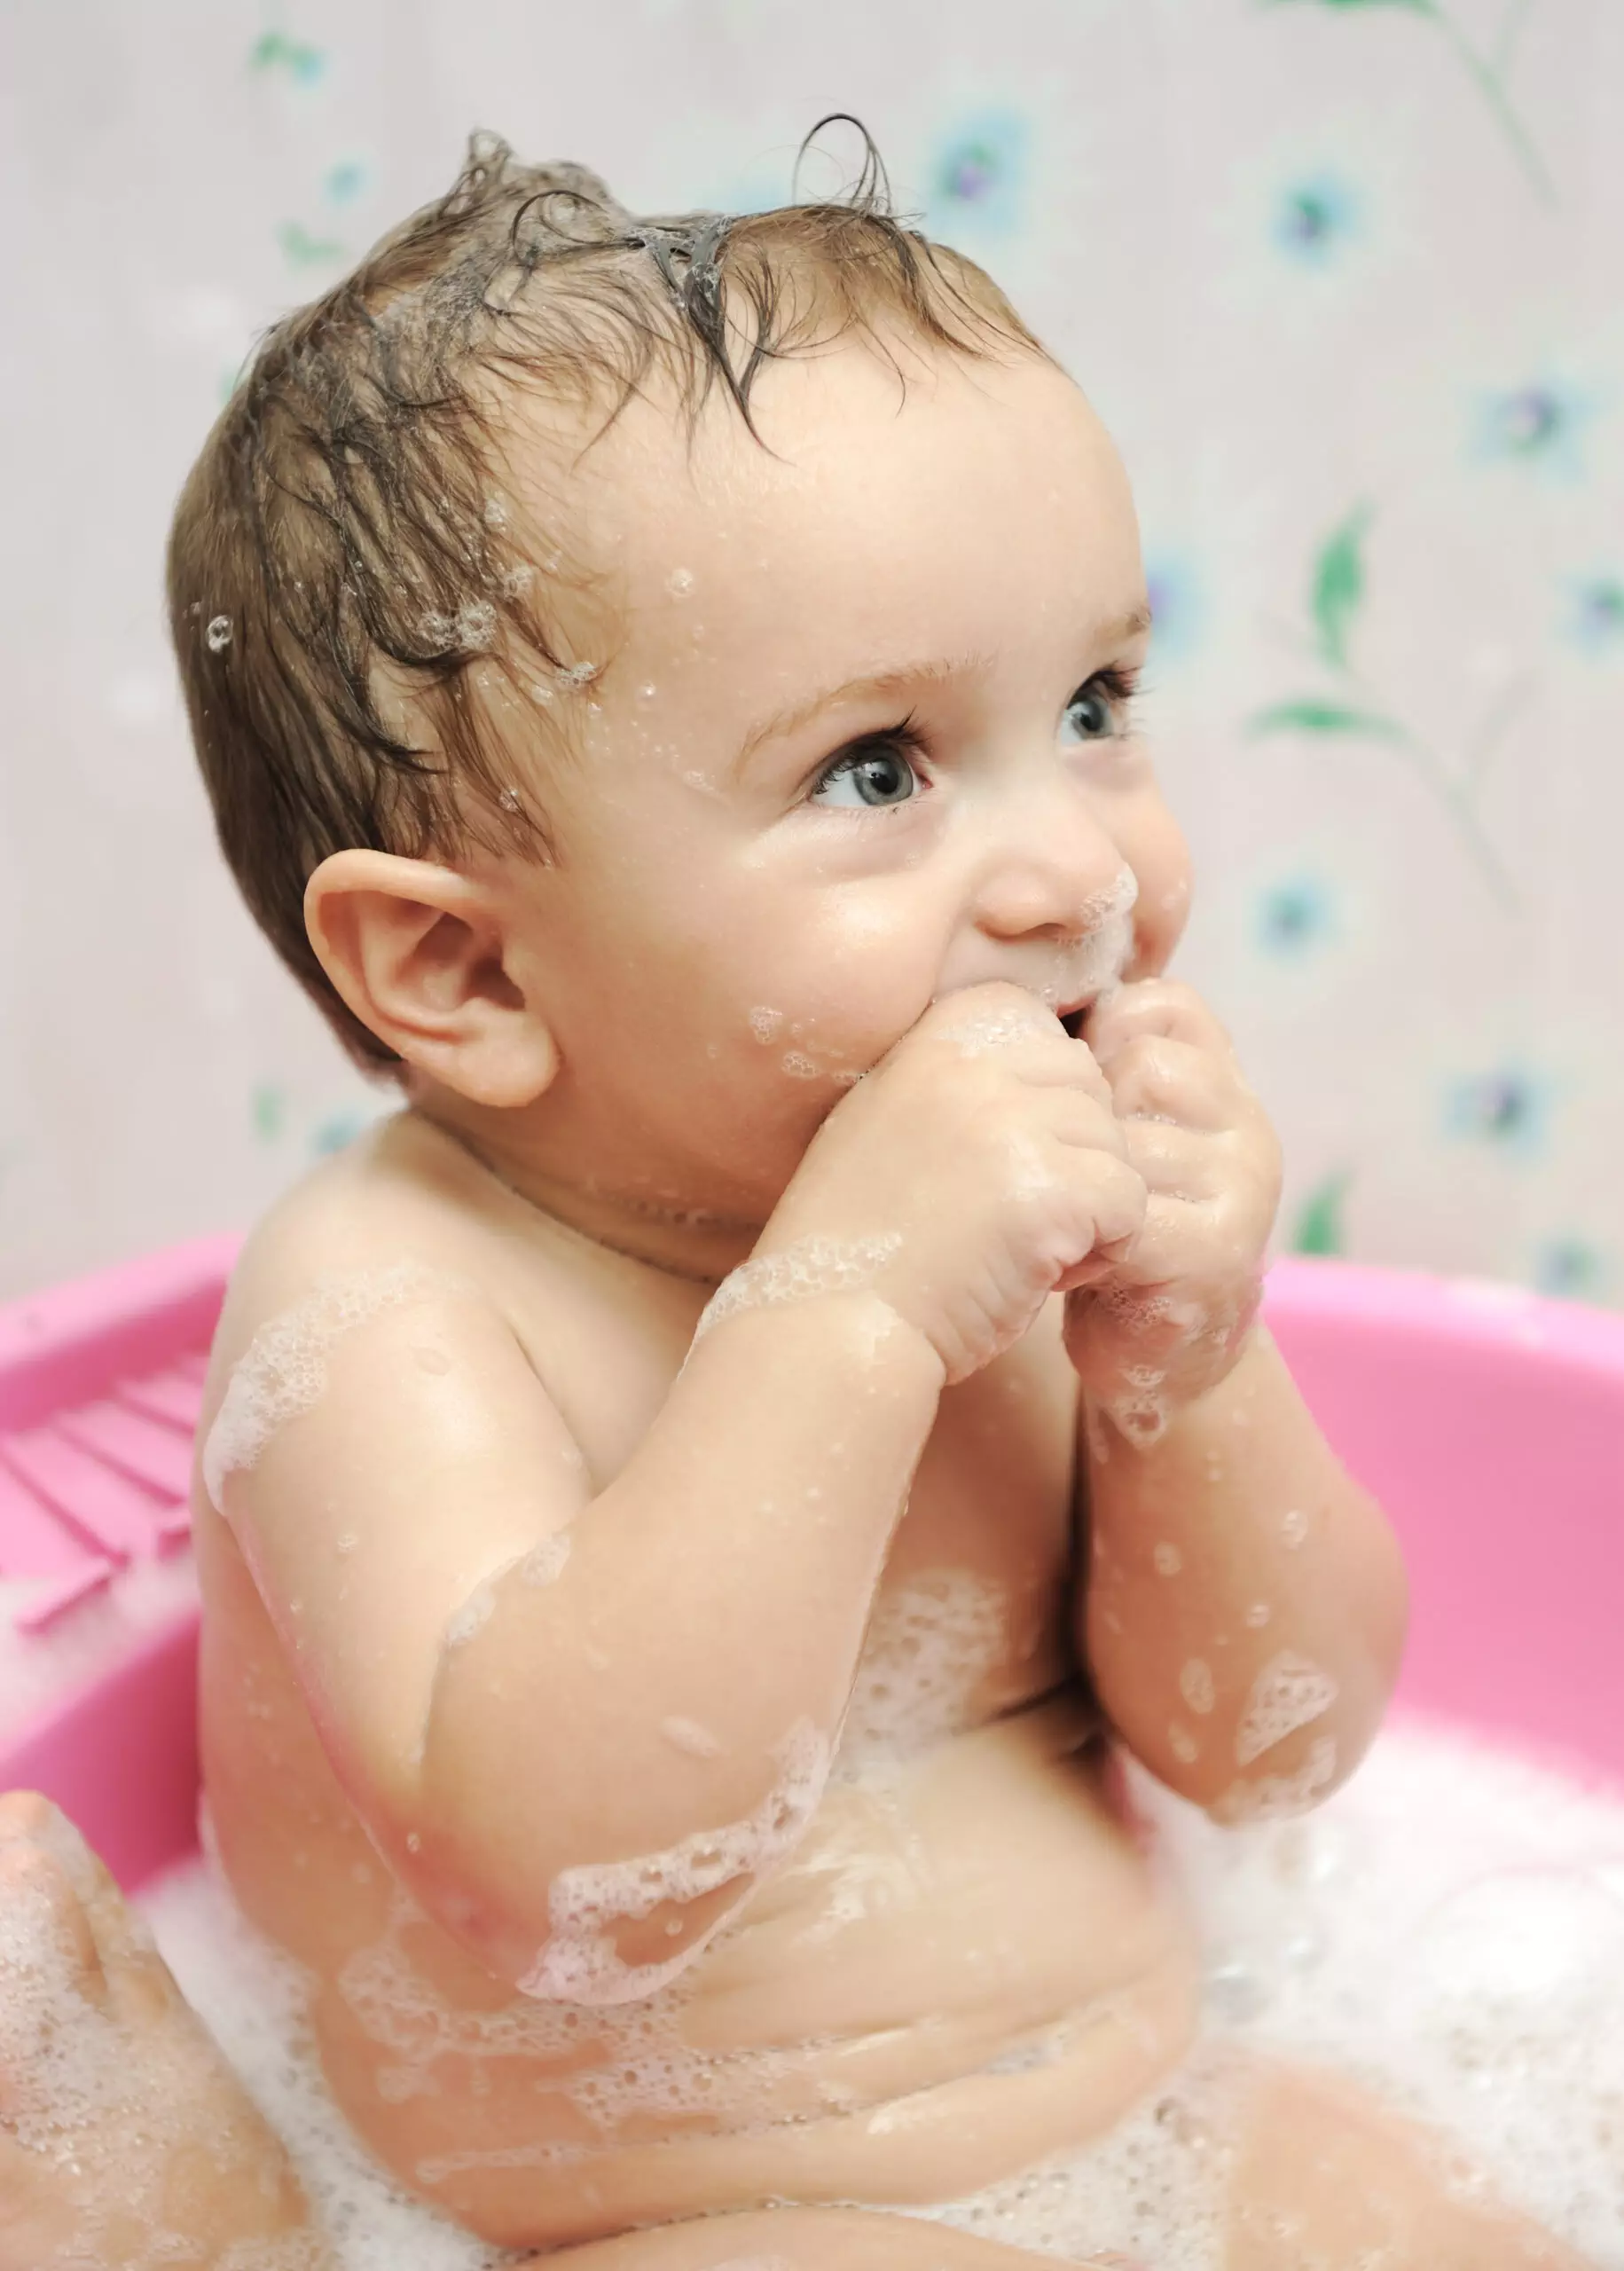 Baby bathing in pink tub with soap bubbles.